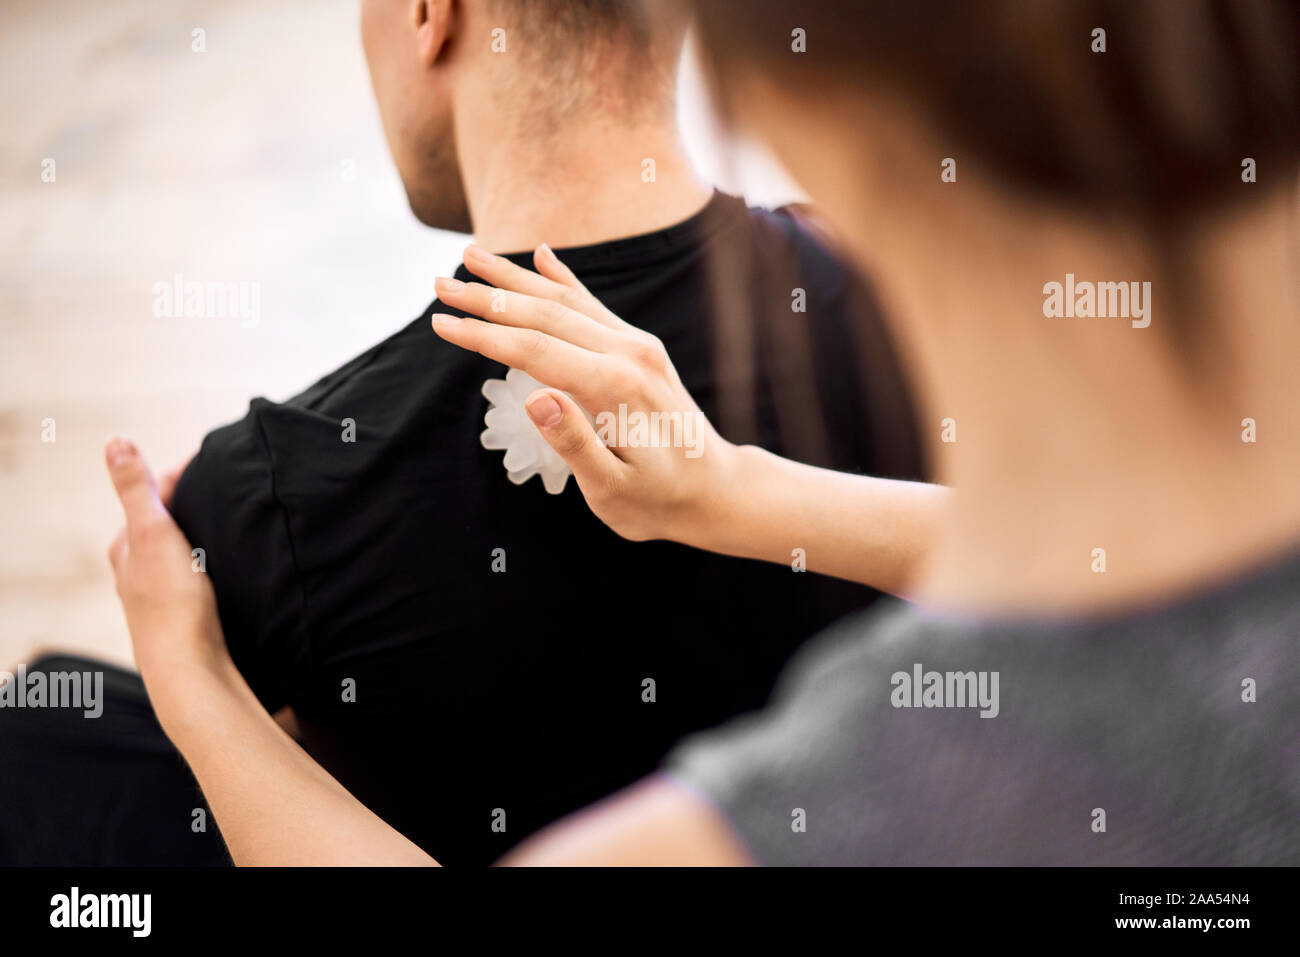 Woman doing back massage to man with massage ball in room, close up Stock Photo